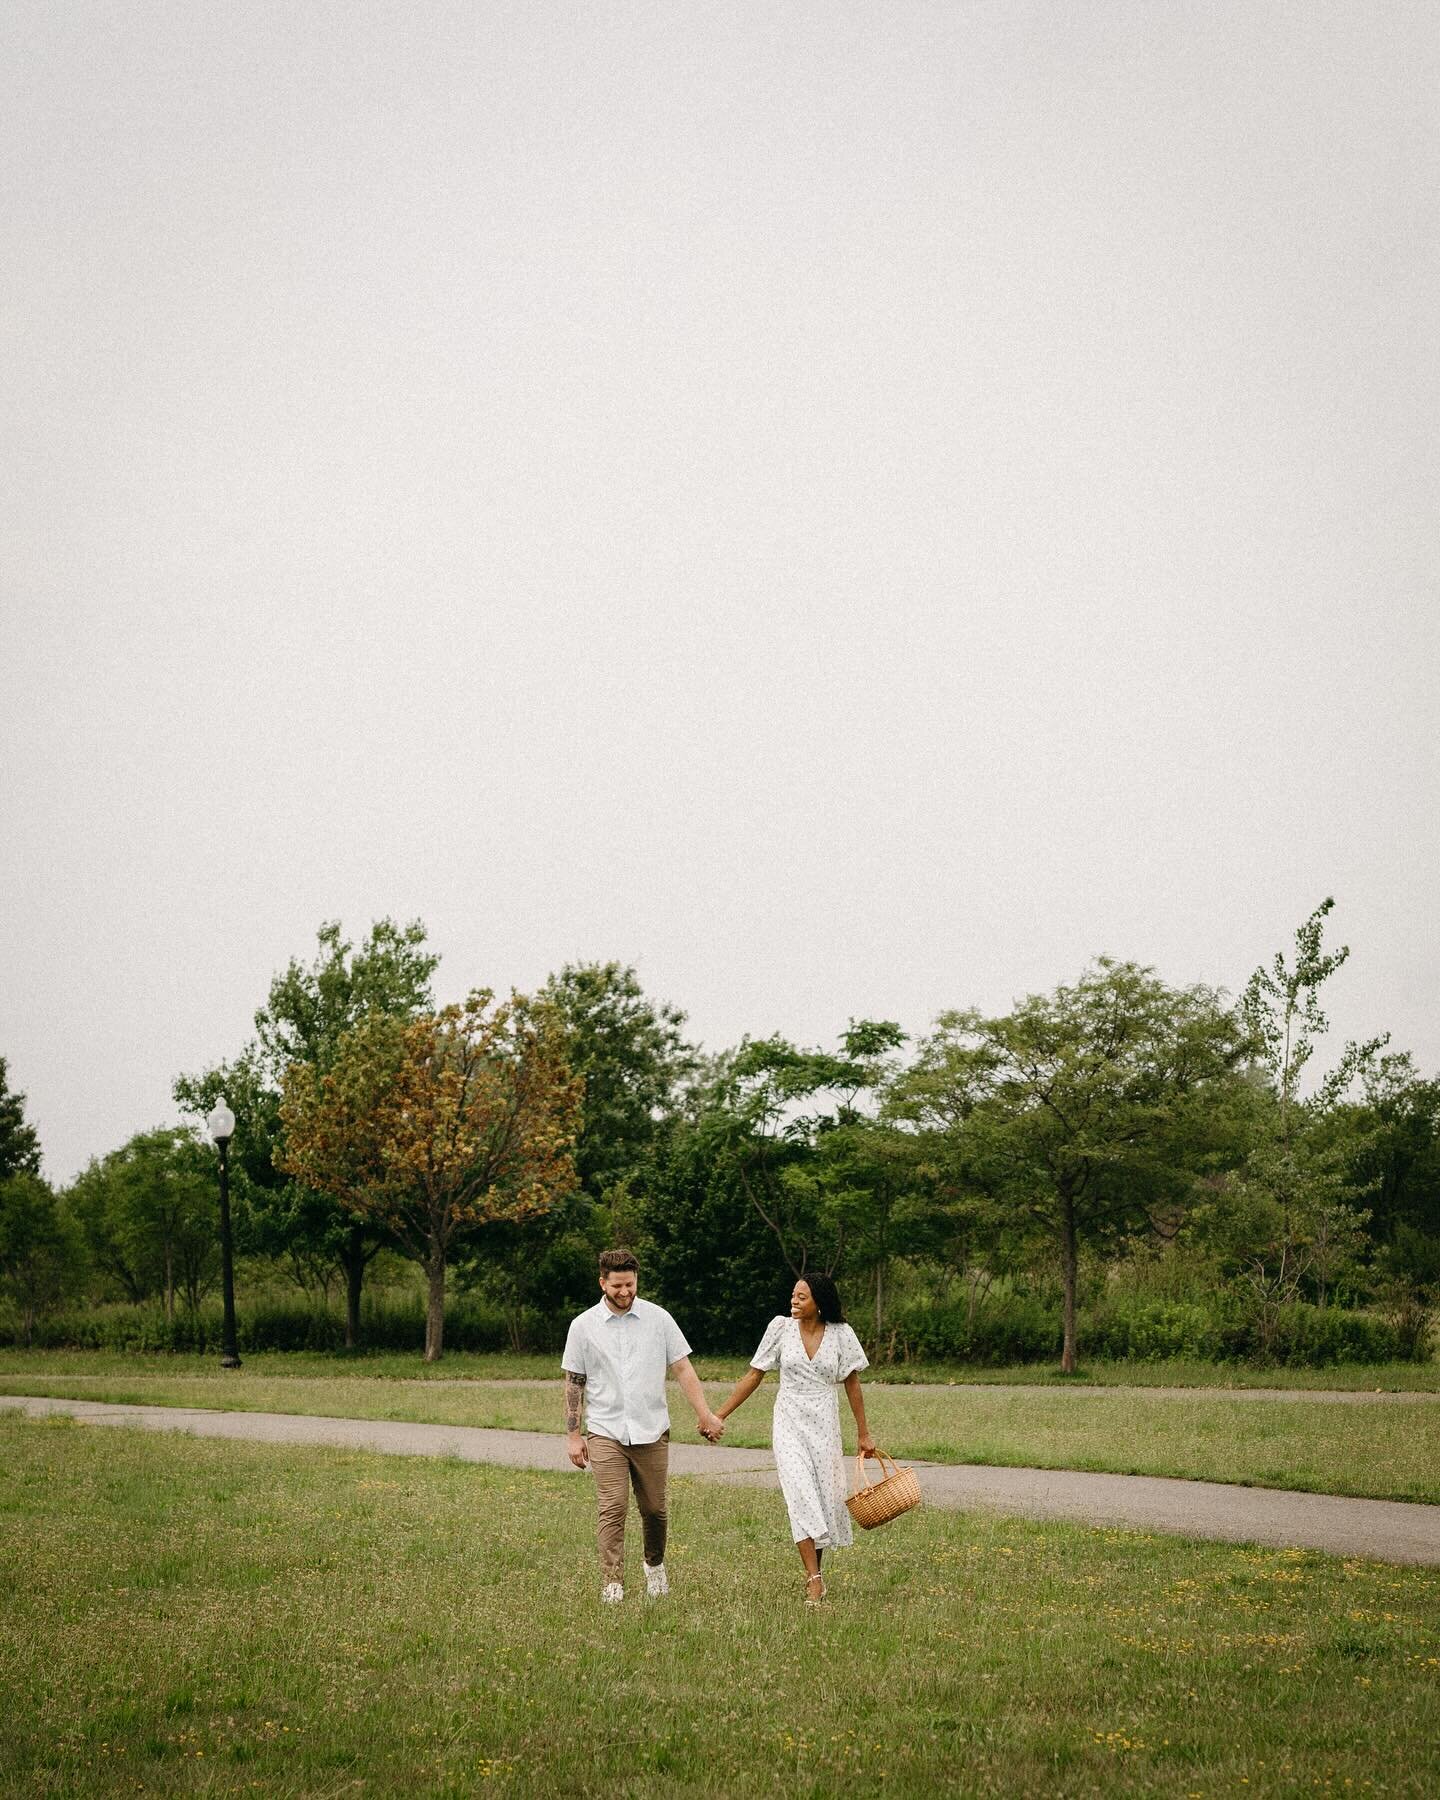 In honor of April, the start of wedding season for me, here&rsquo;s a throwback to Christie and Will, whose wedding I get to capture at the end of the month upstate! 

It&rsquo;s also an equally busy personal month; I leave for Jamaica next week for 